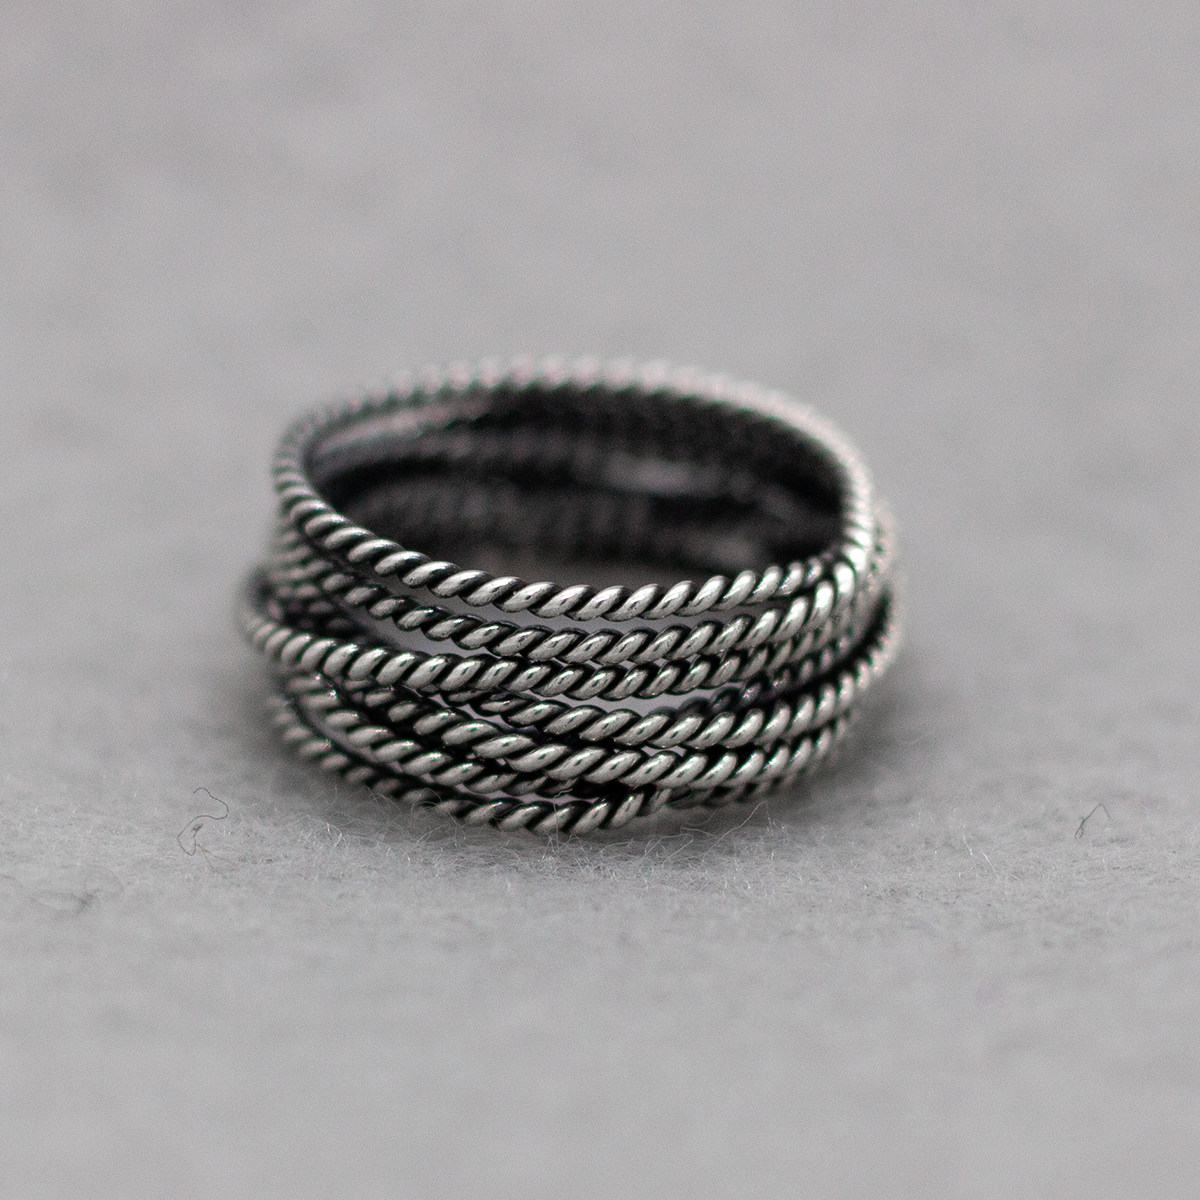 Aran - Twisted Lasso Oxidised Silver Ring. Inspired by the intricate twists of lasso rope designs, this piece adds a unique flair to your style.  Crafted from oxidized sterling silver and featuring a comfortable 7mm band width, it's ideal for wearing alone or stacking with other rings for a bold statement. Kisnale.